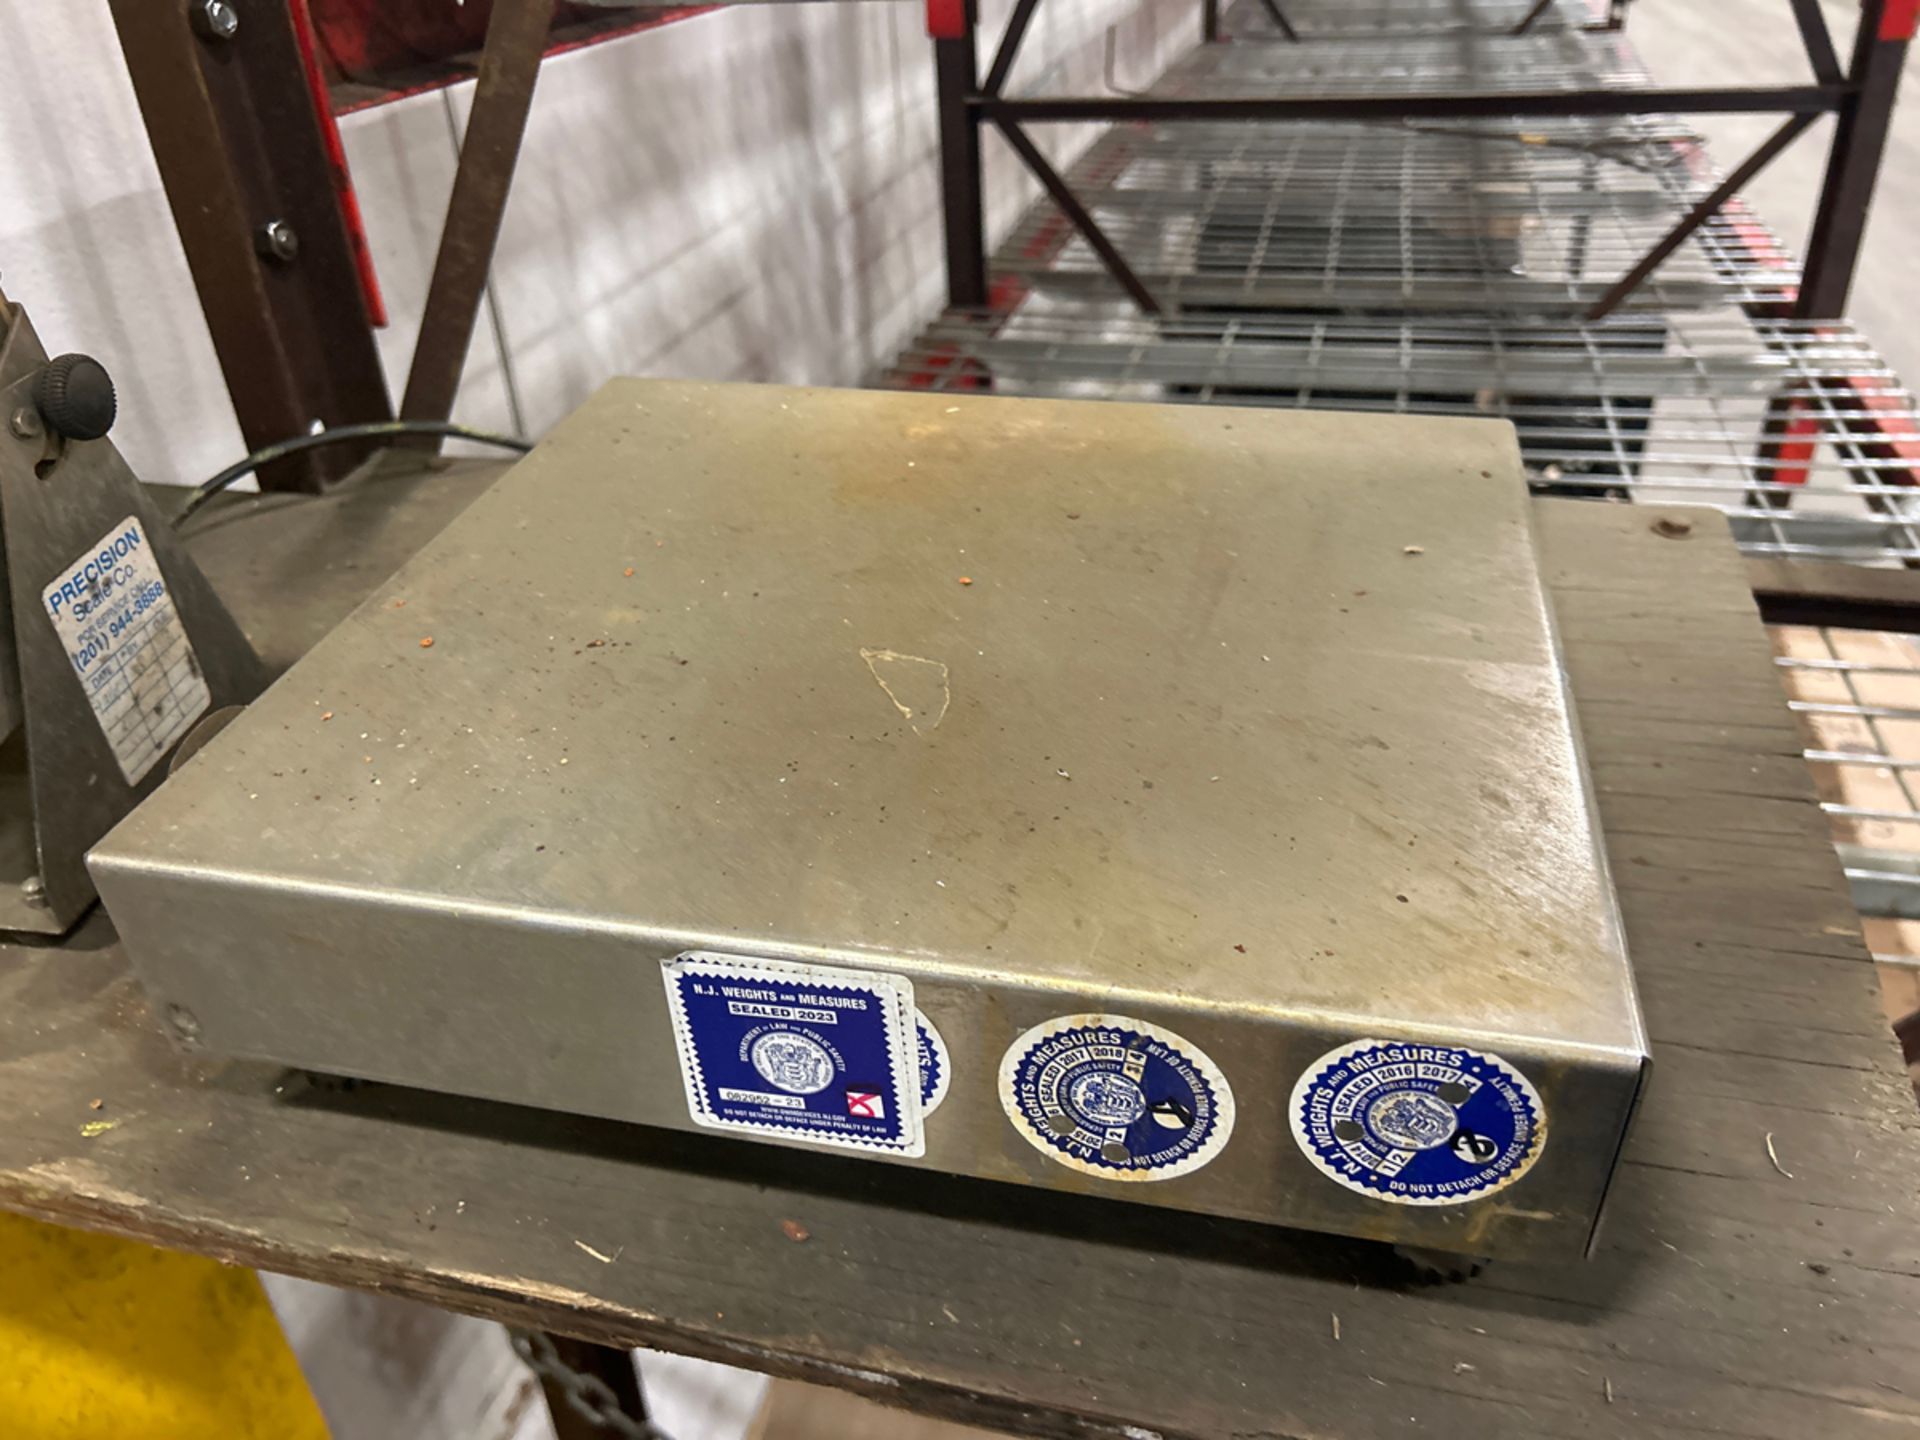 Stainless Steel 30lbs Capacity Postage Scale - Image 3 of 3